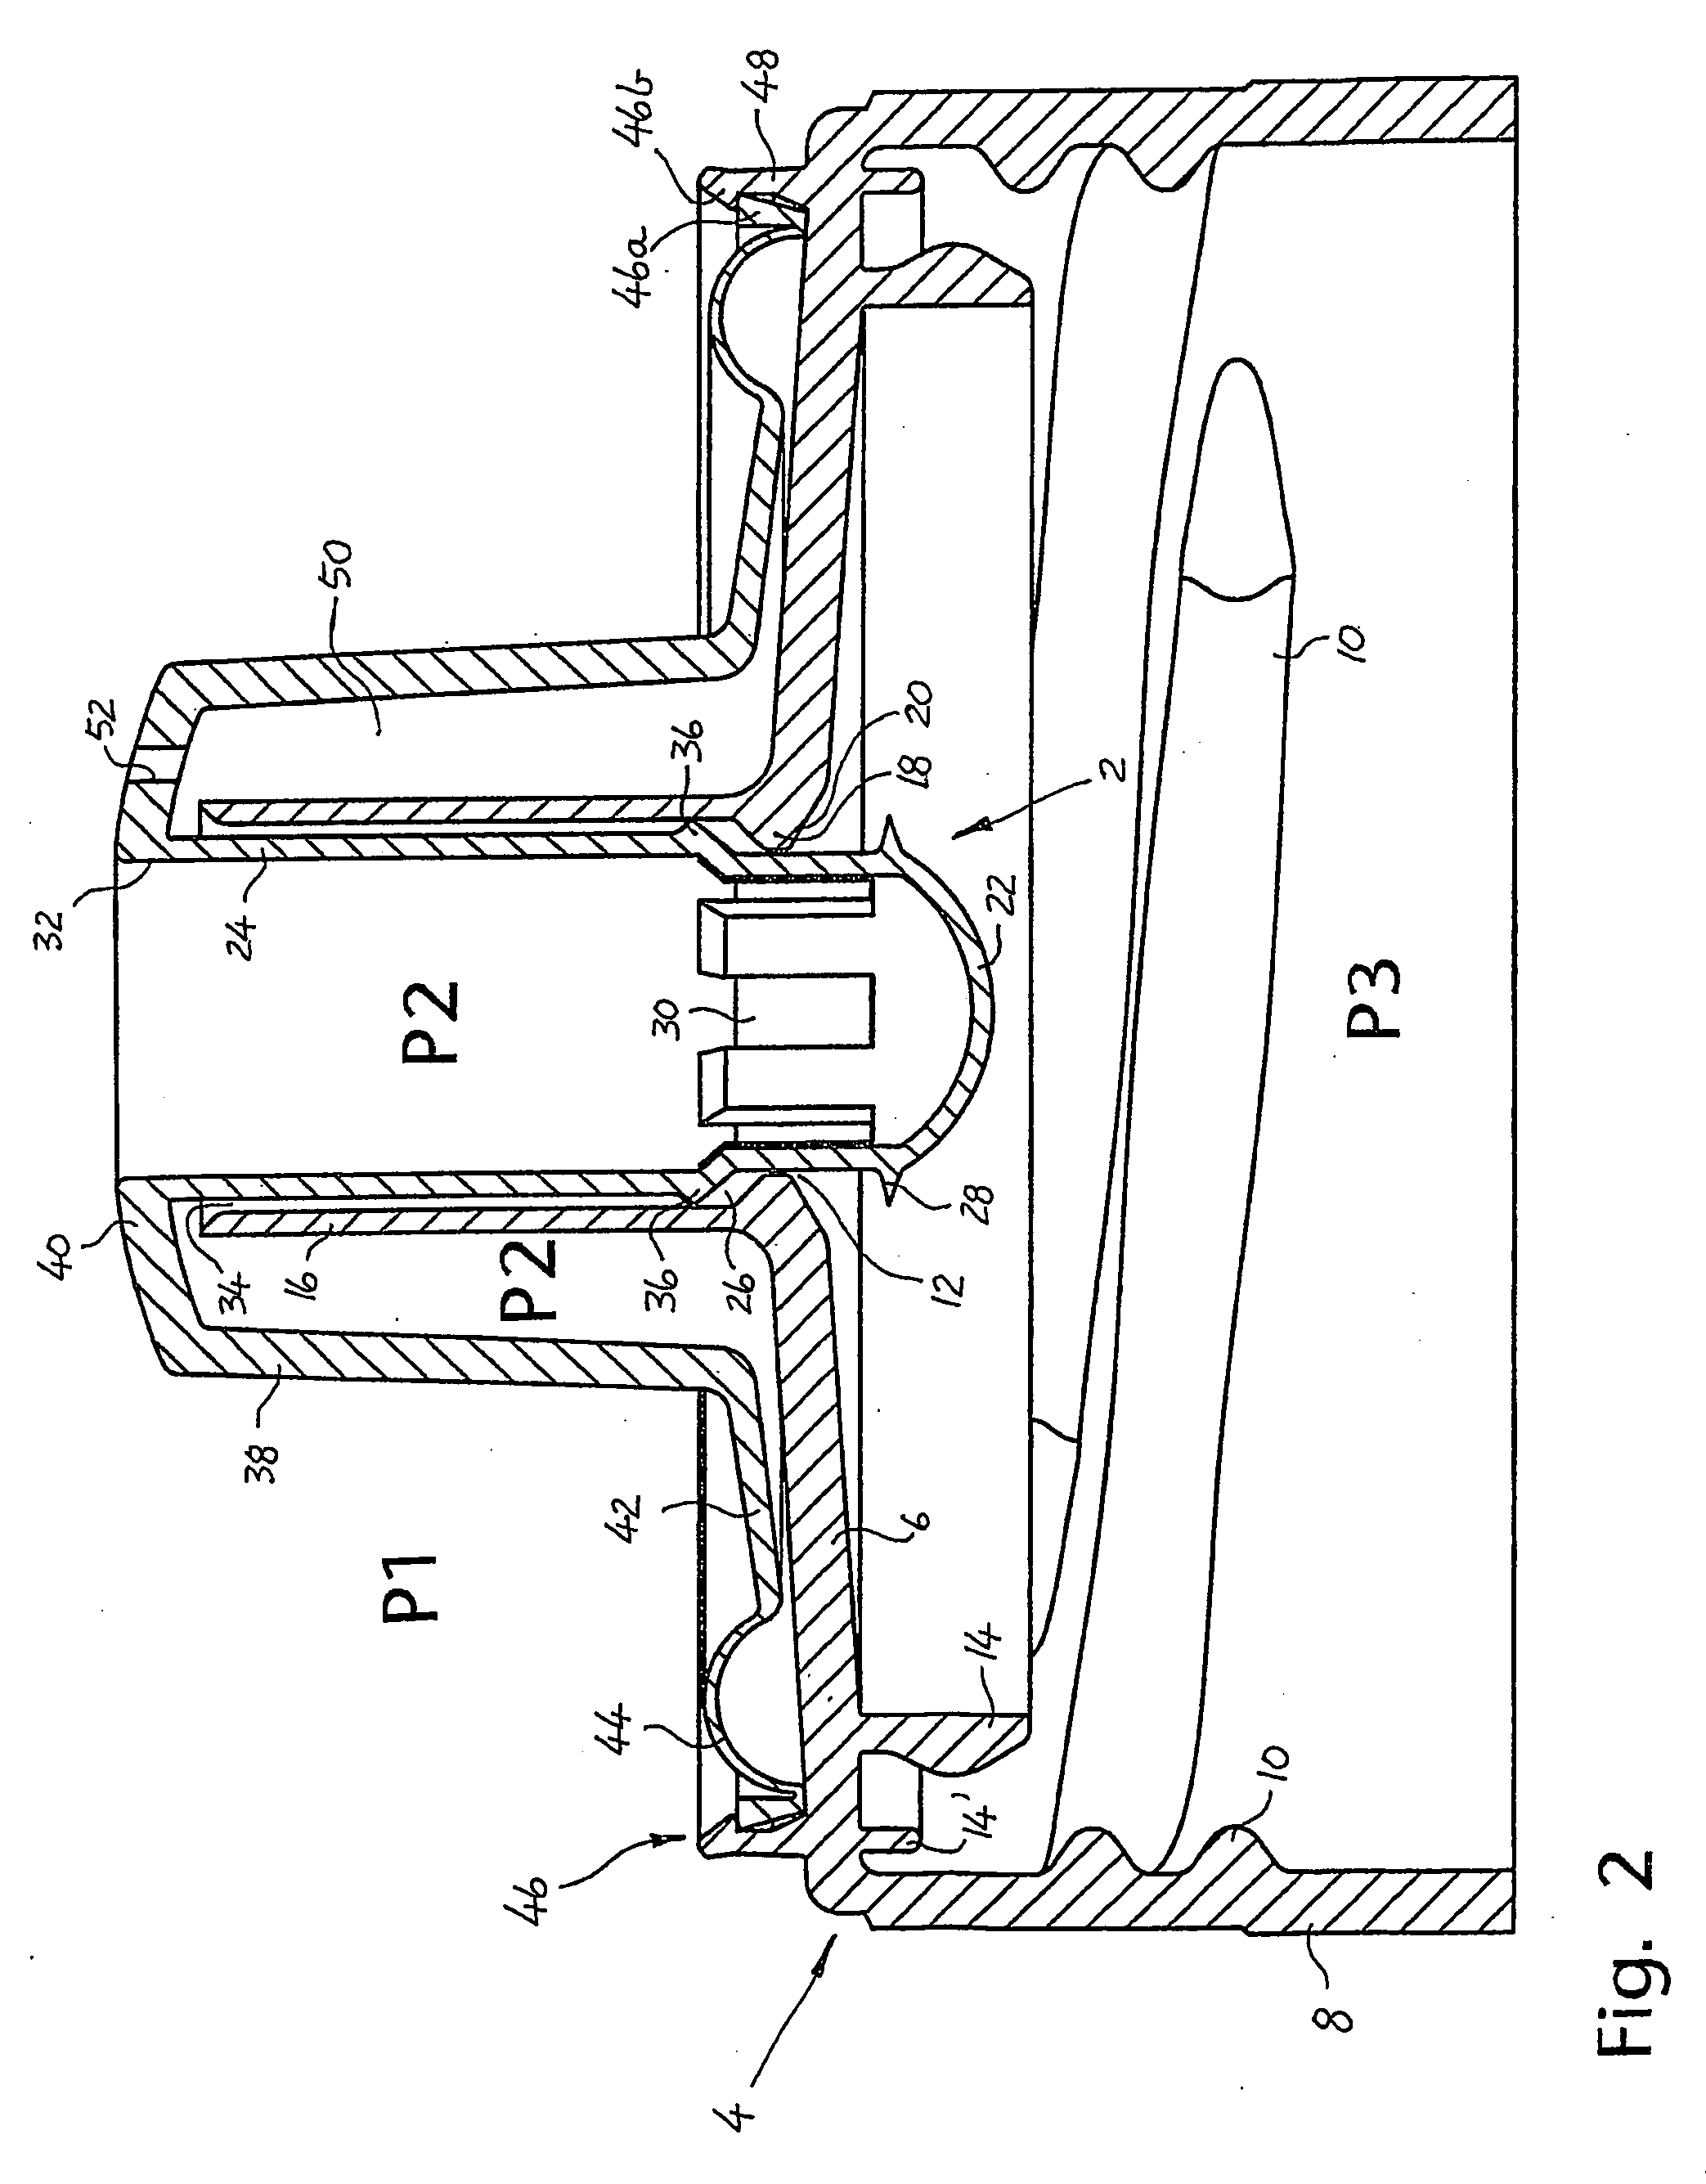 Hygiene-maintaining device of an underpressure-activated valve for a drinking receptacle